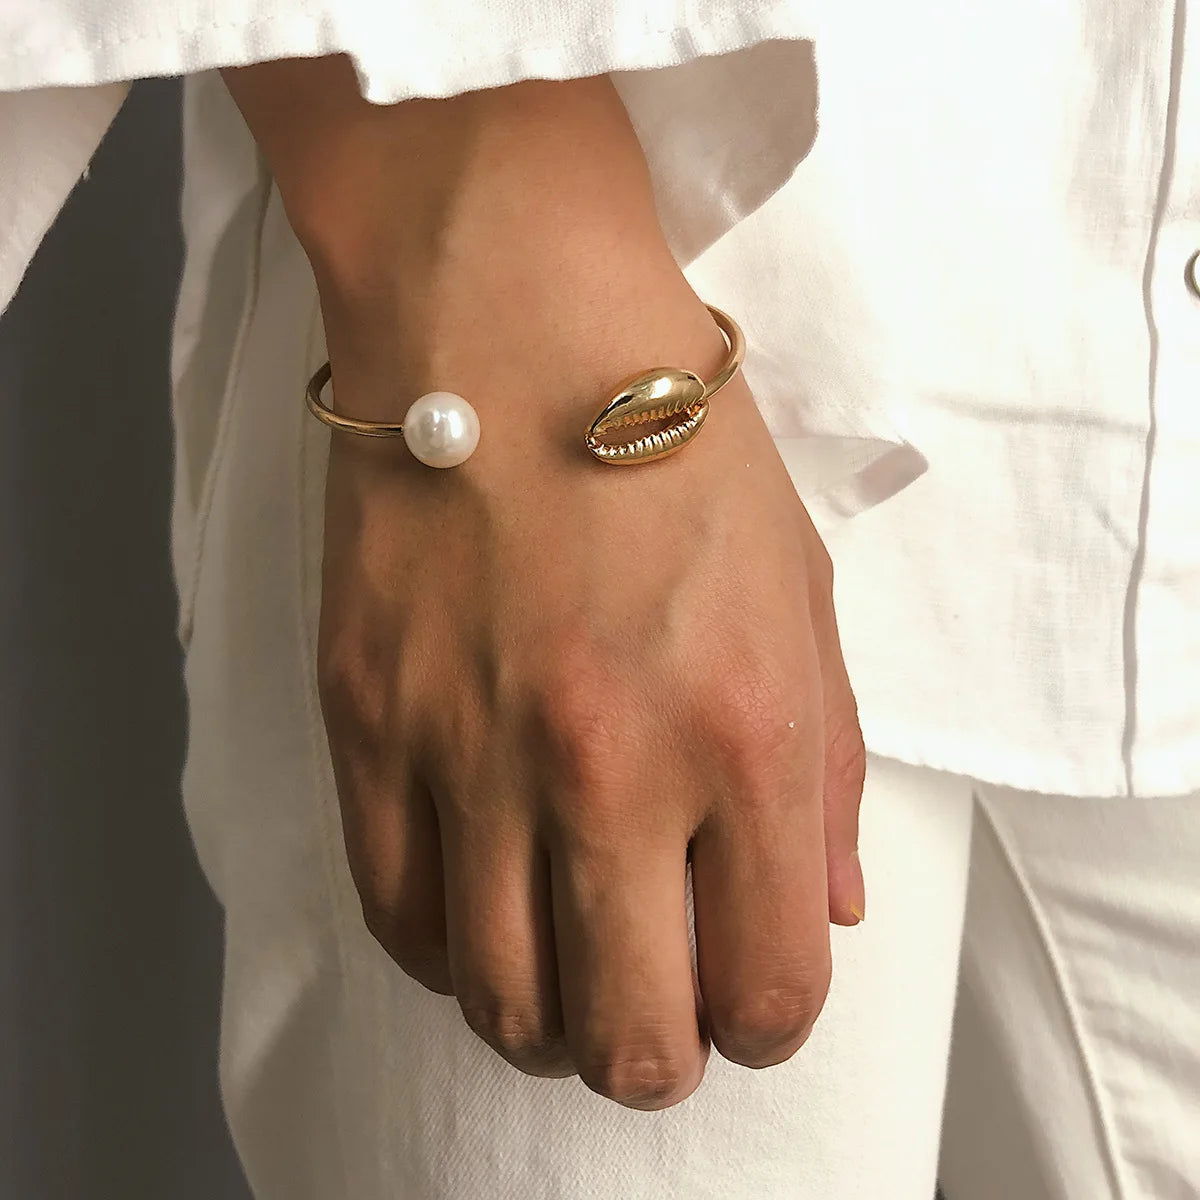 Gold Color Cowrie Shell Bracelets for Women Pearl Beads Charm Cuff Opening Bracelet Bohemian Beach Jewelry Mujer Pulseras